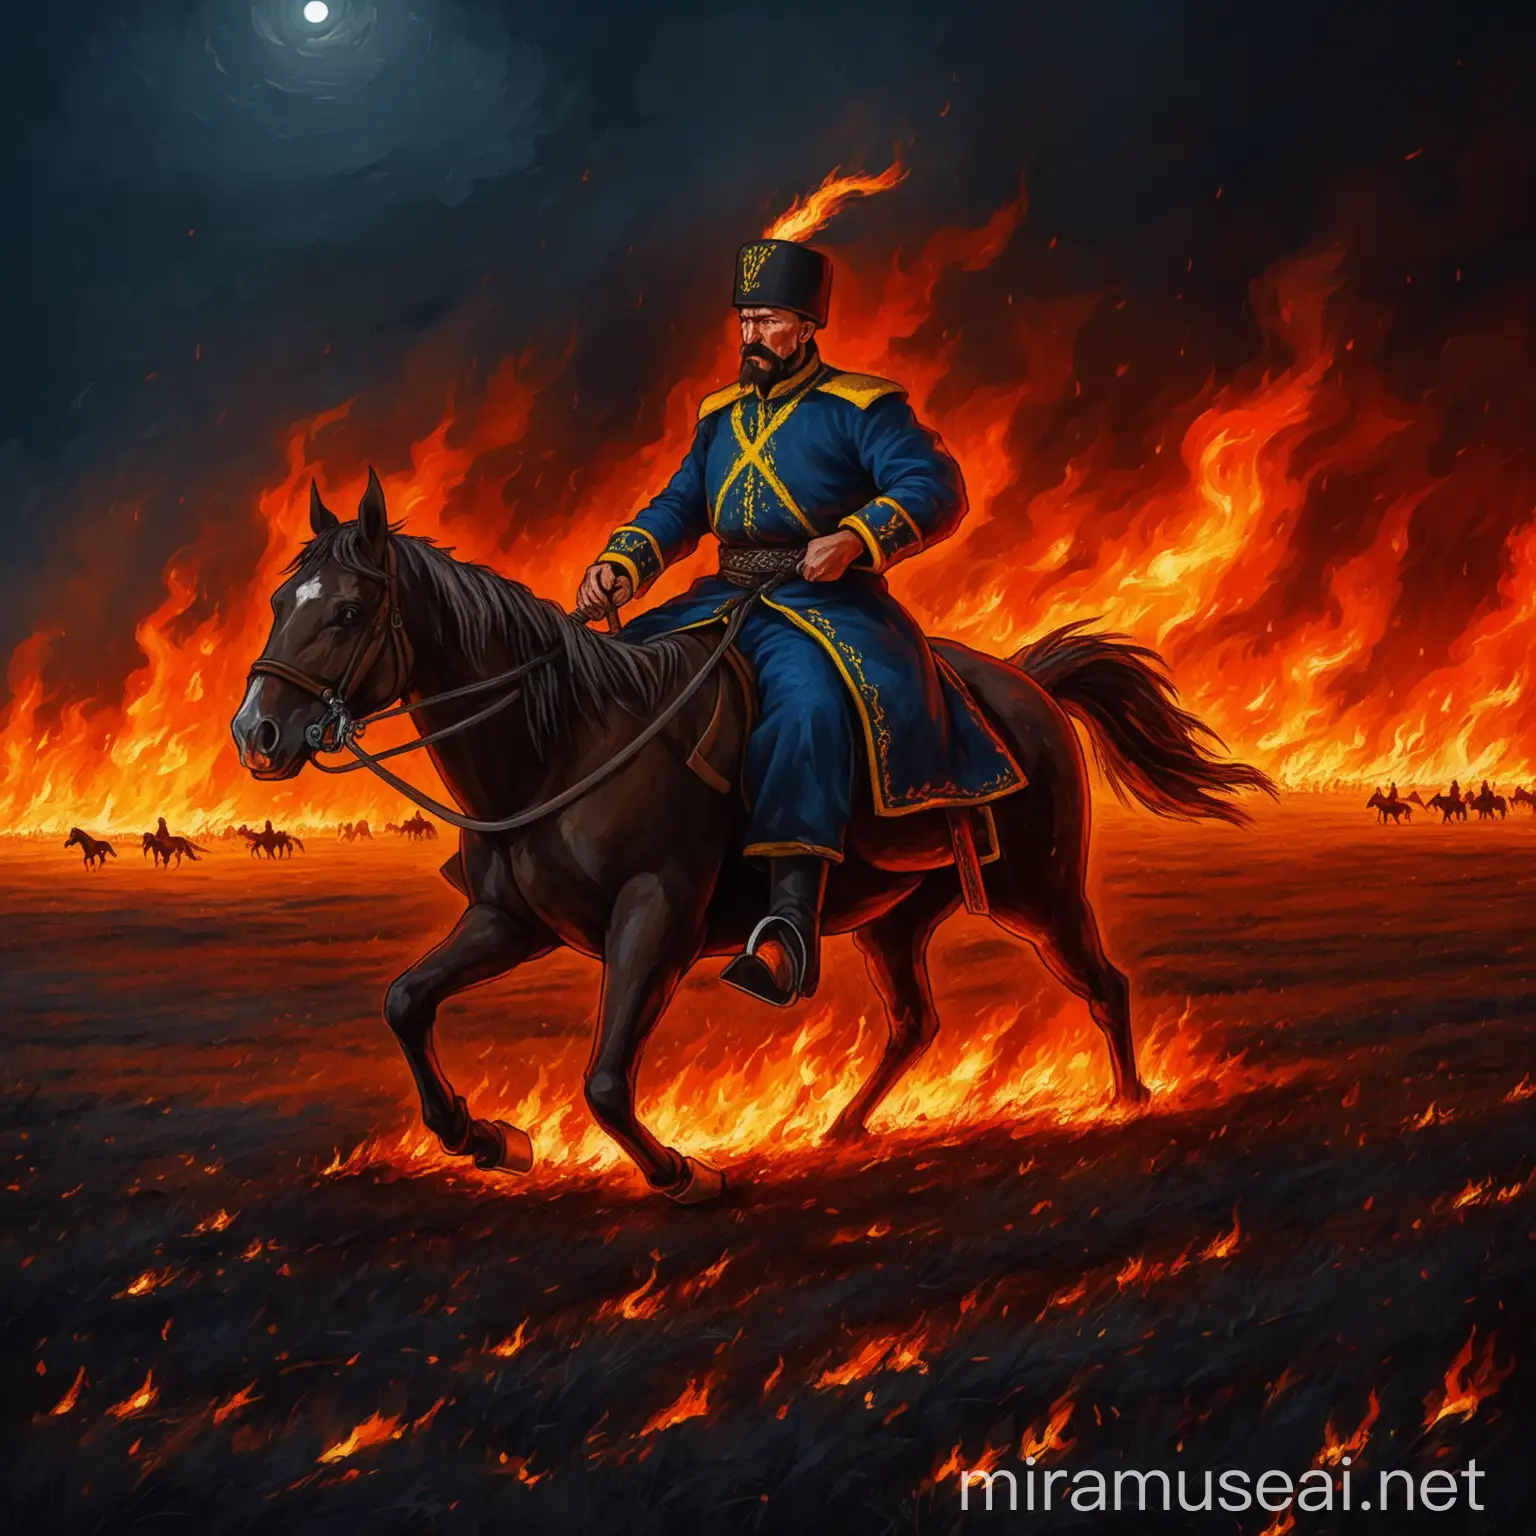 A Ukrainian Cossack with a saber on a horse in a burning field on the night 
Phonk style